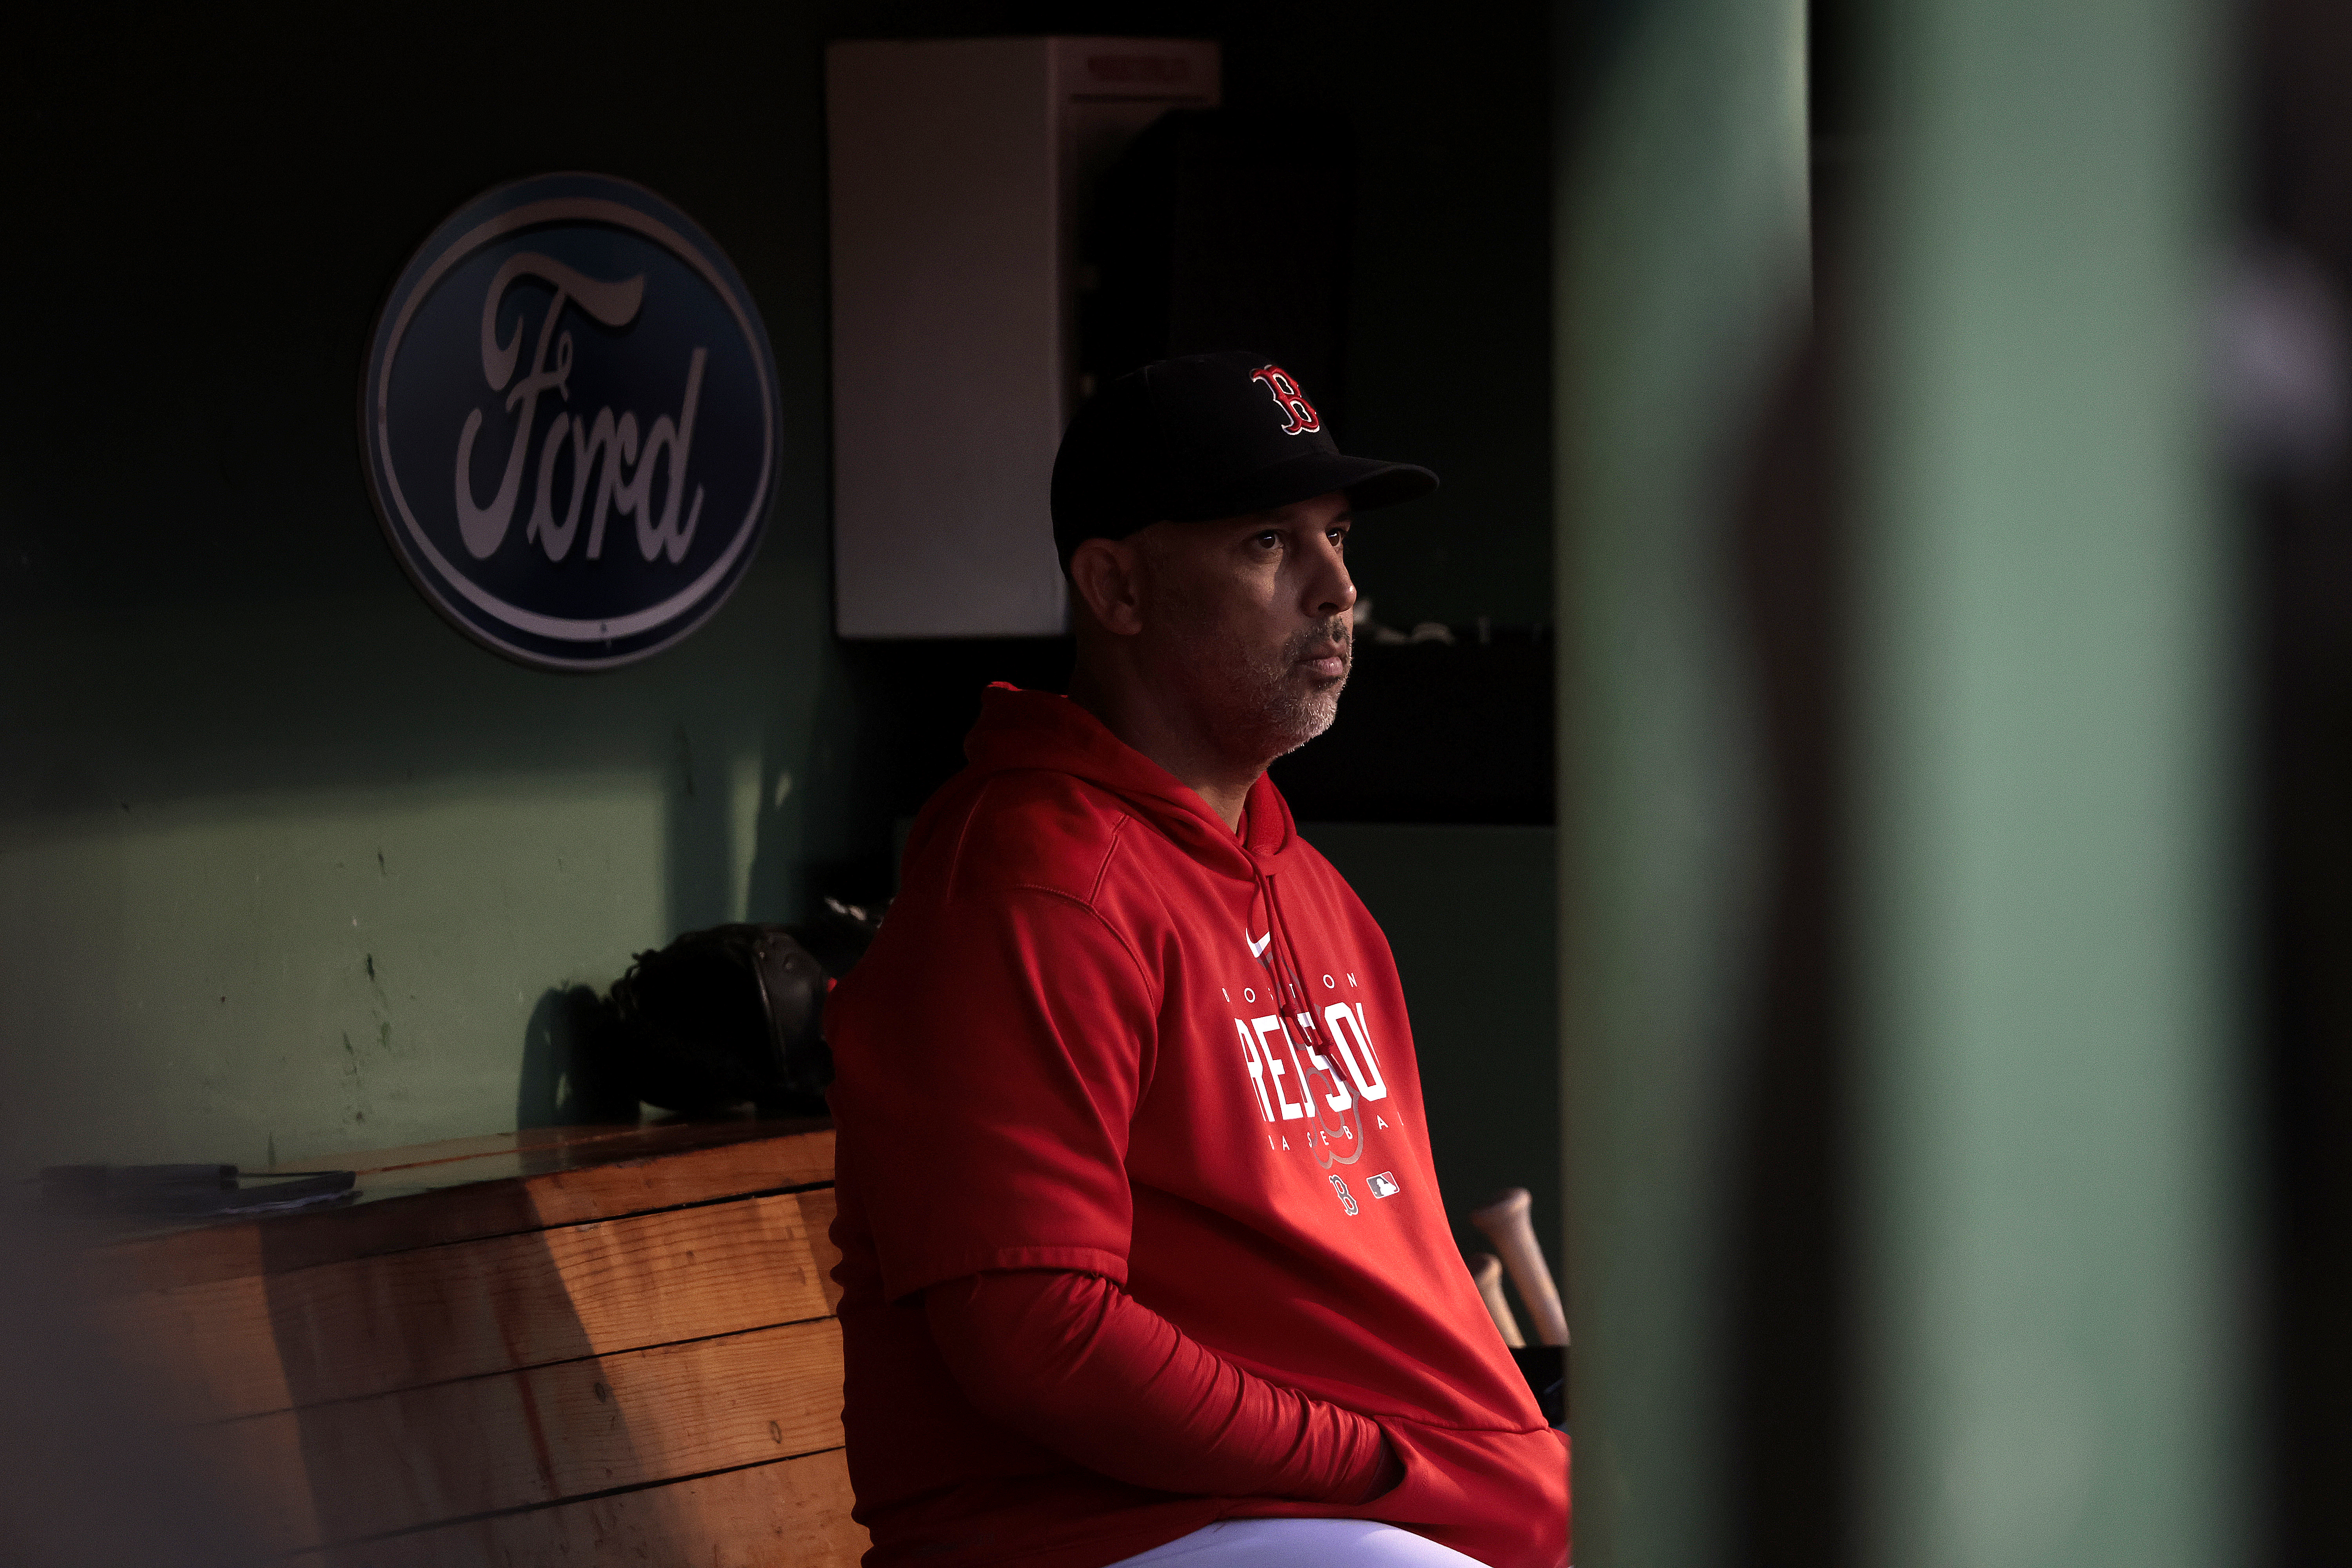 Red Sox manager Alex Cora says he'll be back in 2024 - The Boston Globe